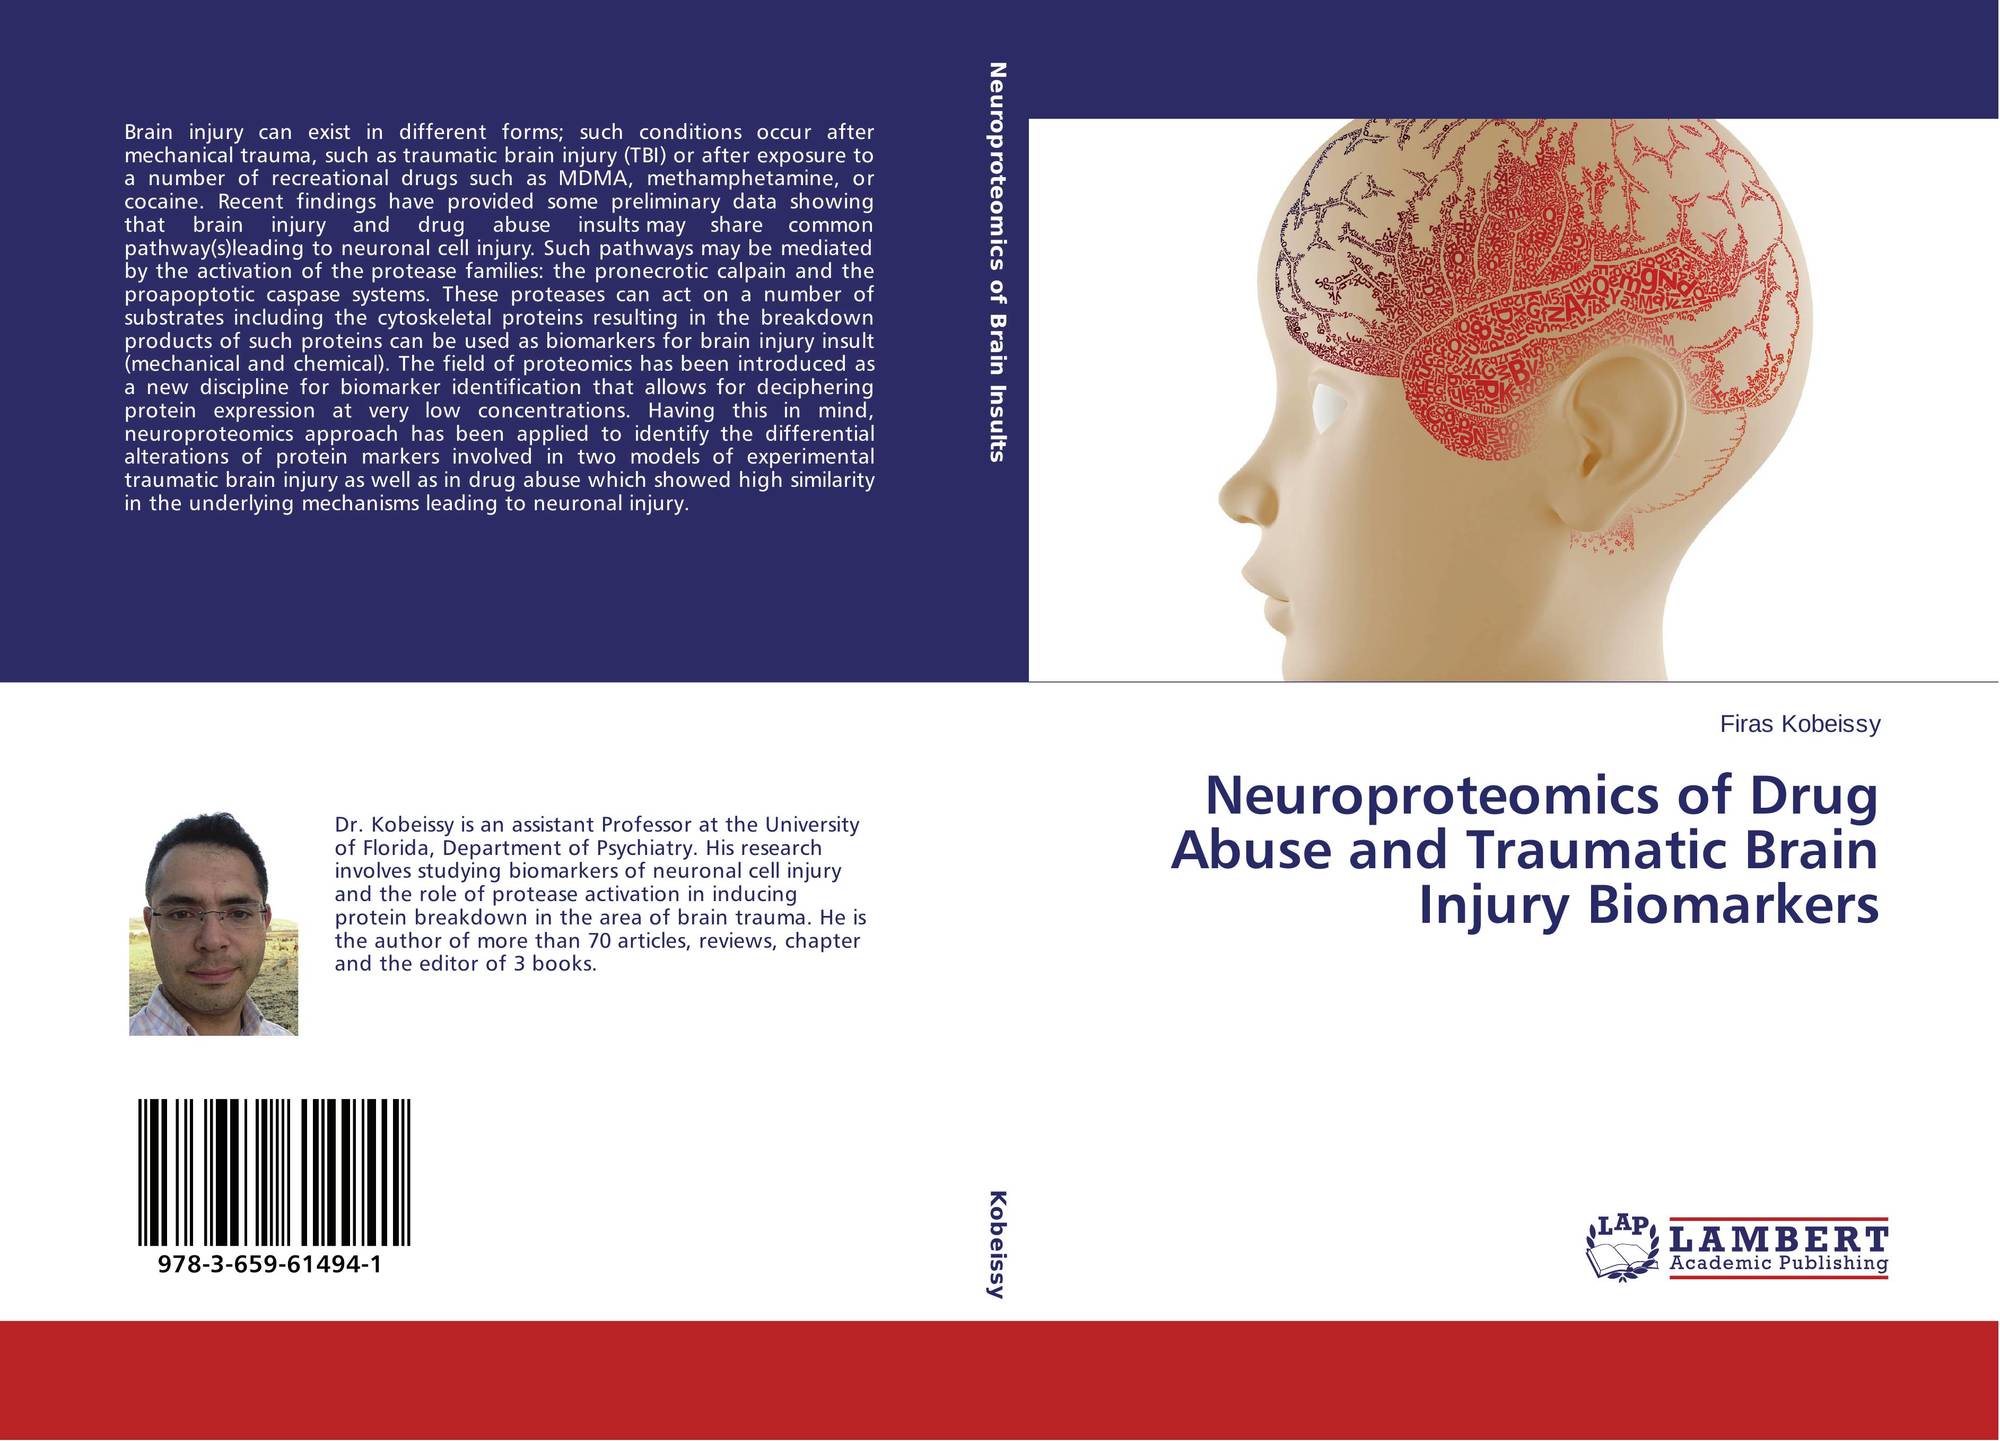 Aquired Brain injury. Best book on Neuropharmacology. Vol. 3 no. 2 (2024): research Journal of Trauma and Disability studies. The photo for presentation about Neuropharmacology.